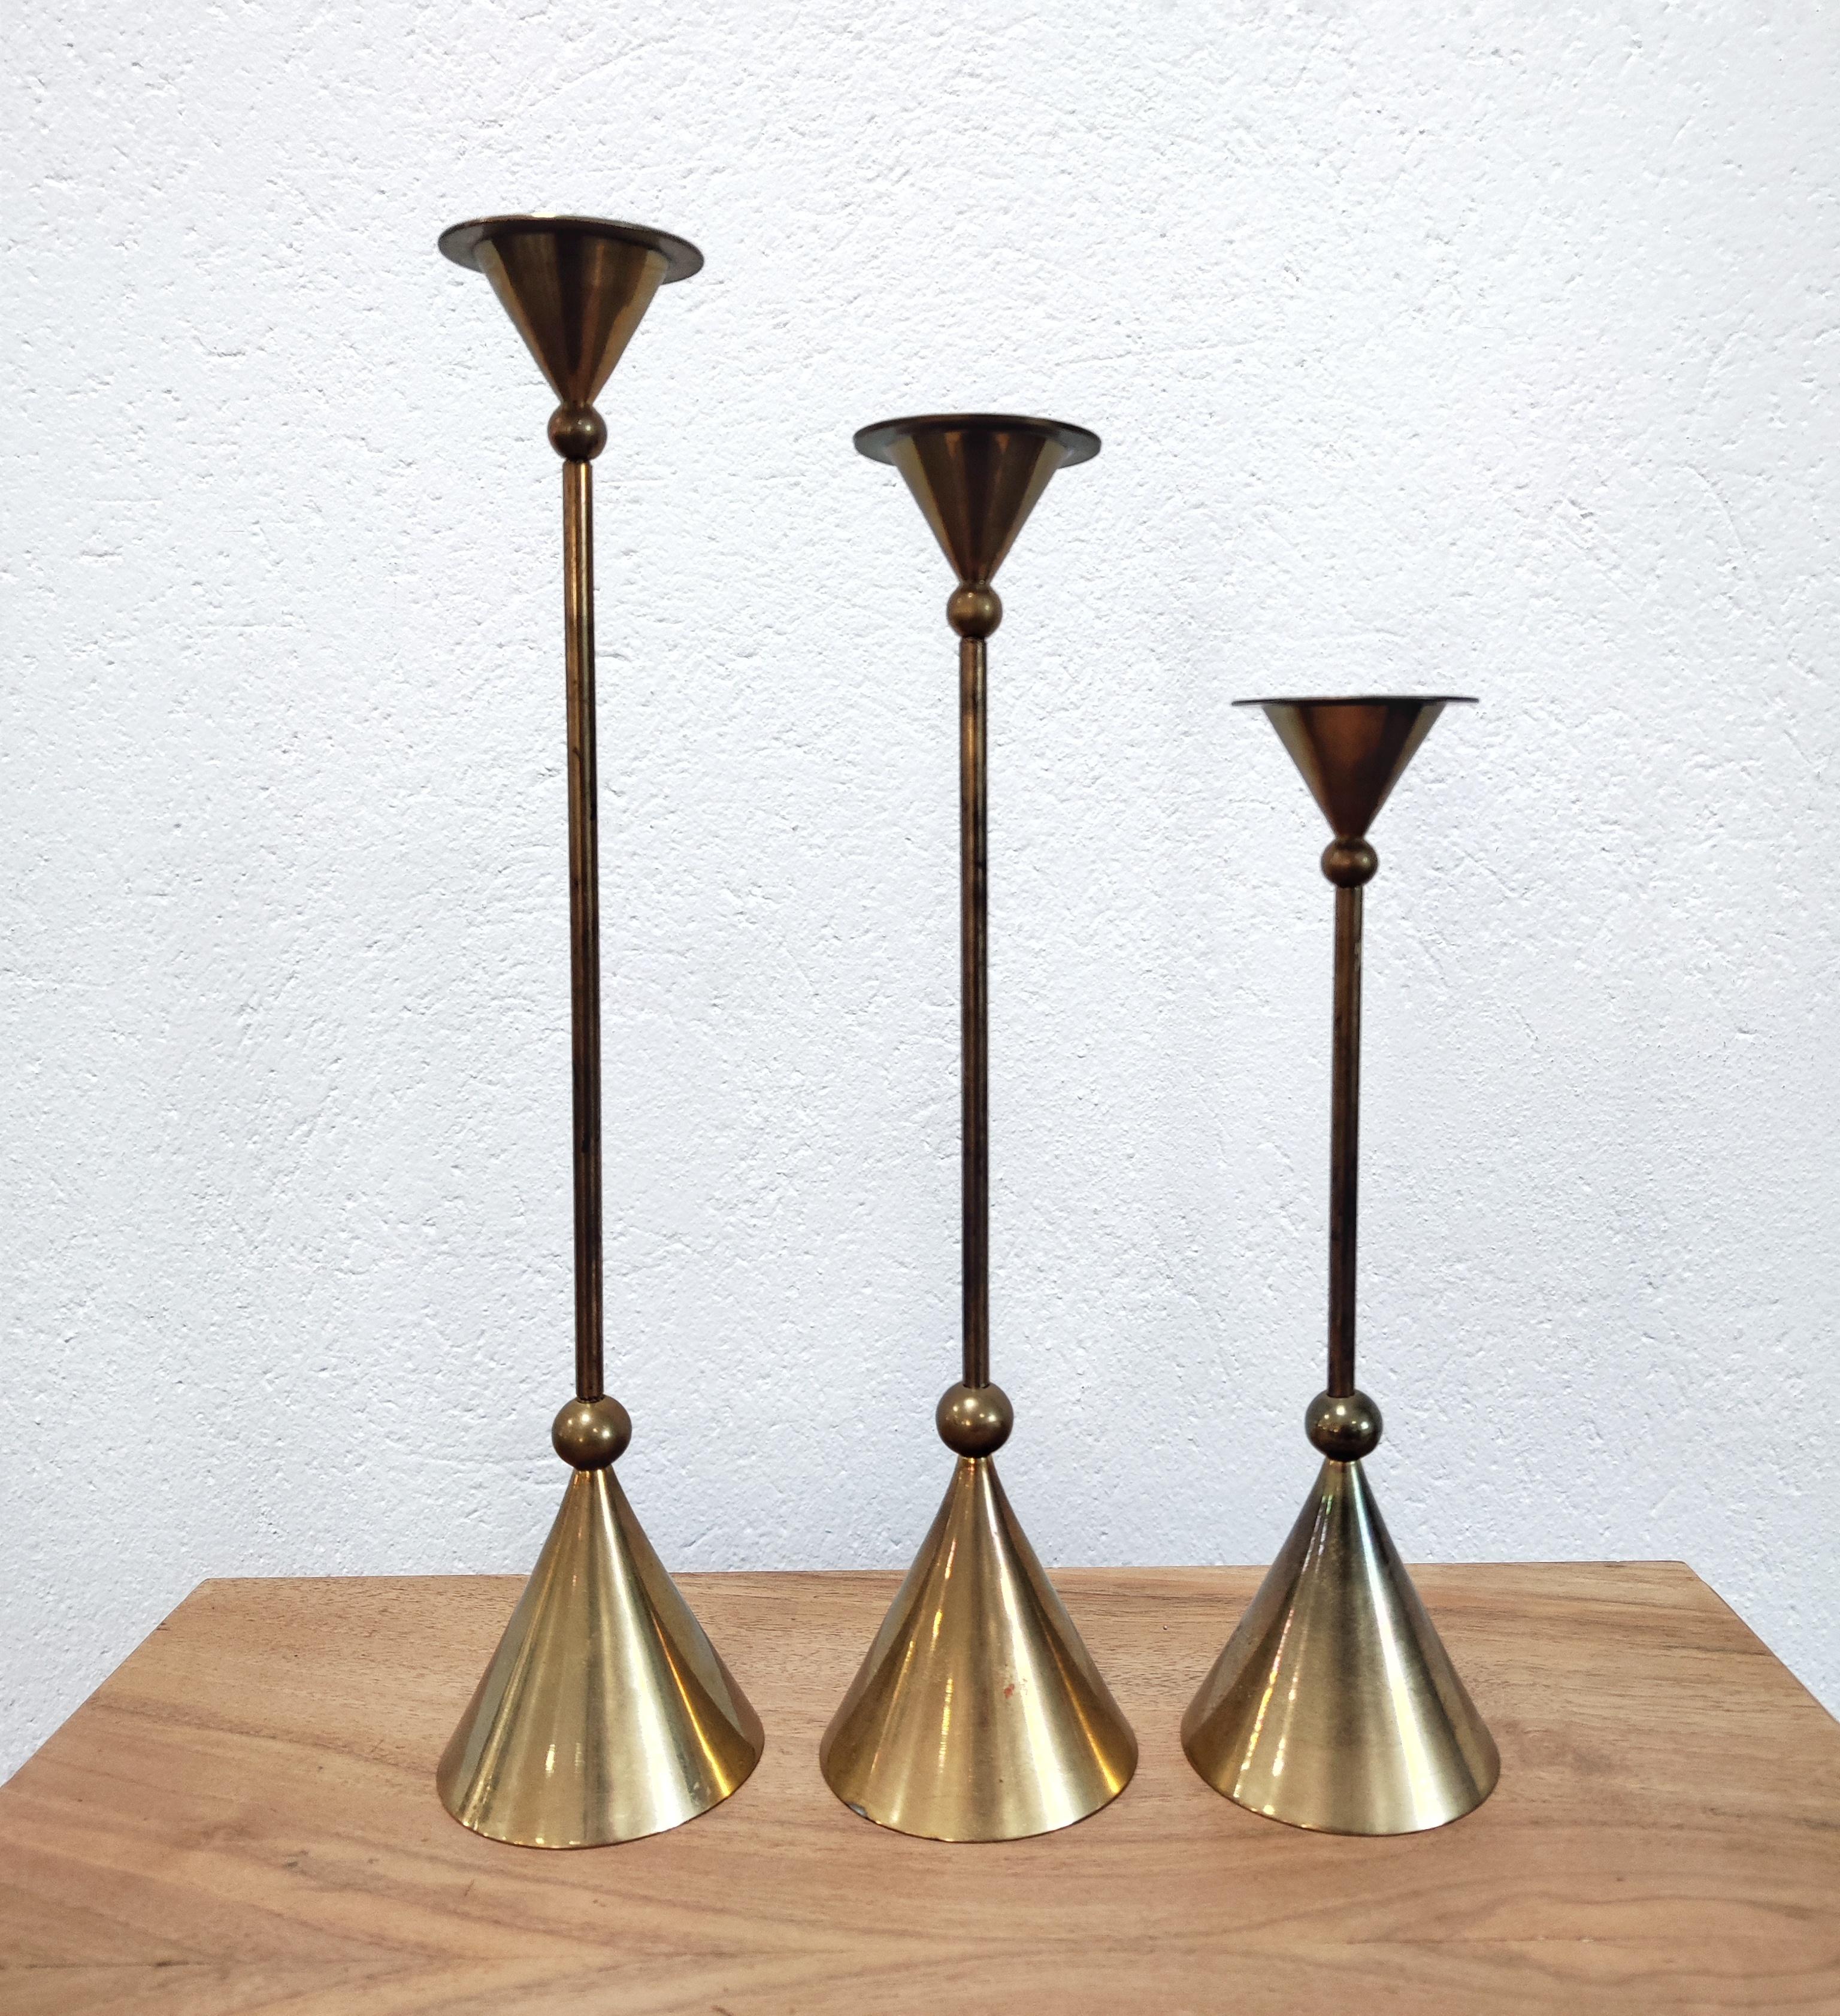 Set of Three Bronze Candle Holders by Christian de Beaumont, France 1980s For Sale 1